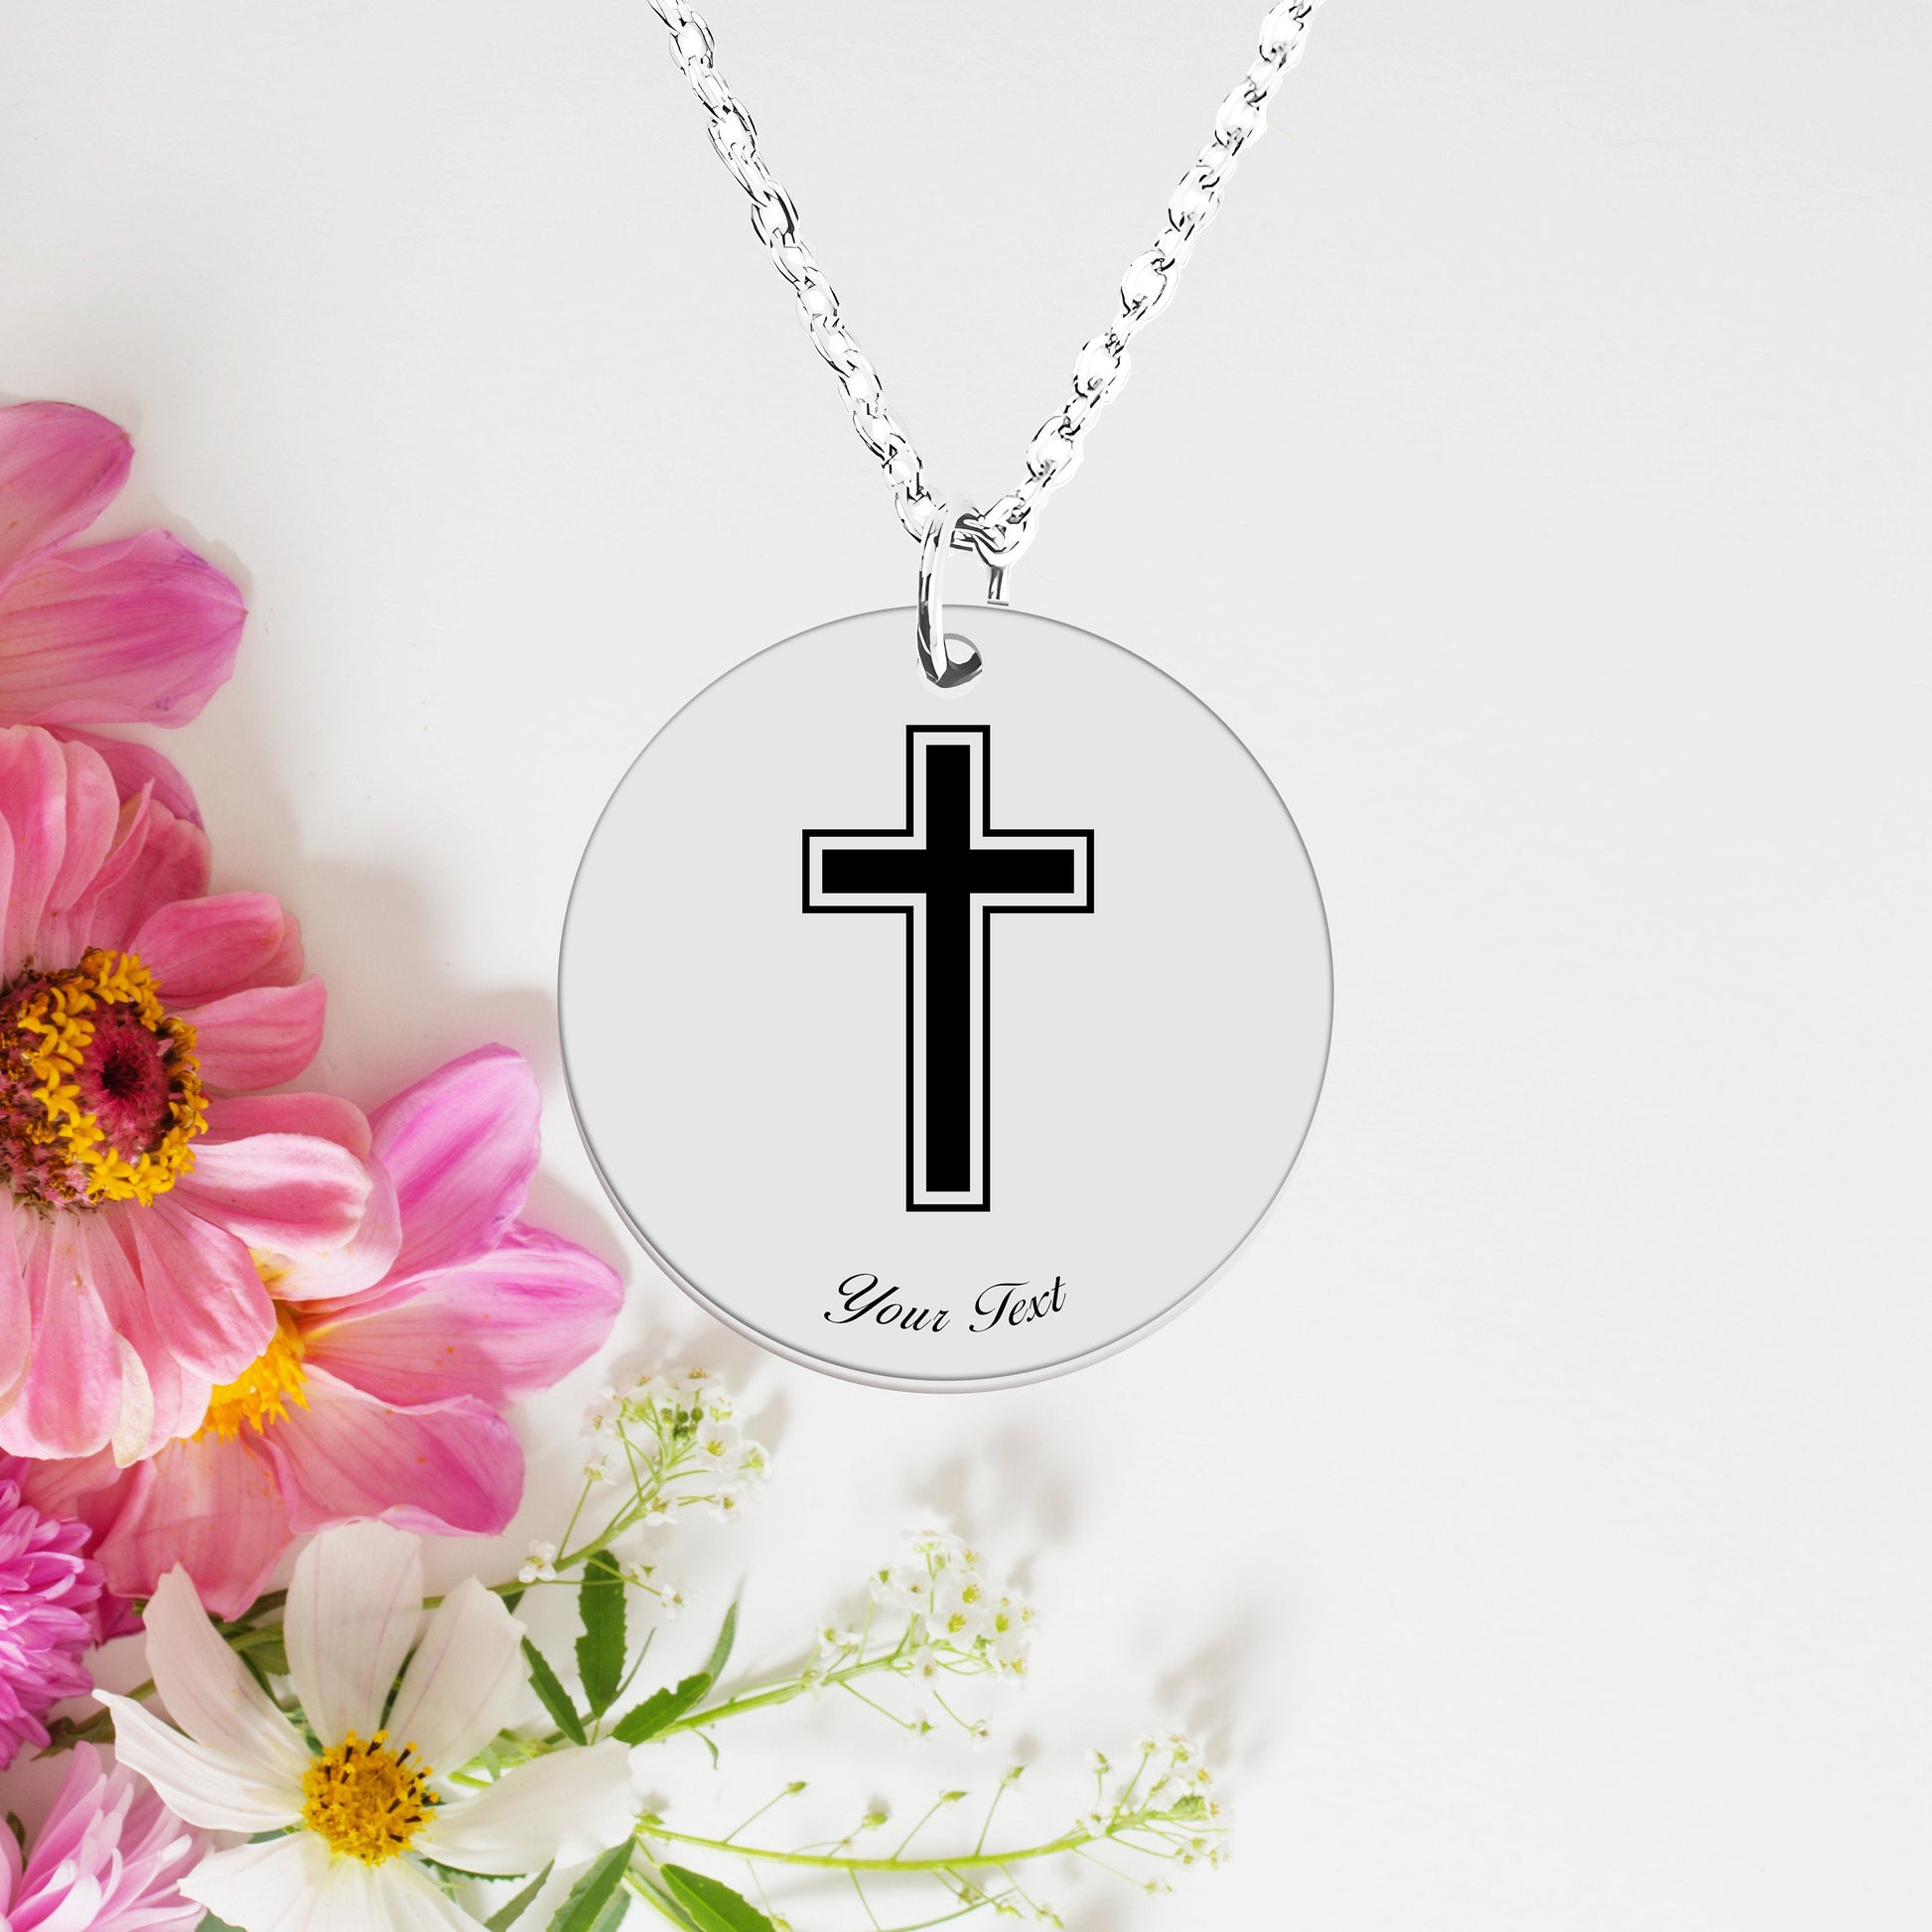 Christian Name Necklace, Your Name Necklace, Minimalist Necklace, Personalized Gift, Silver Necklace, Gift For Him Her